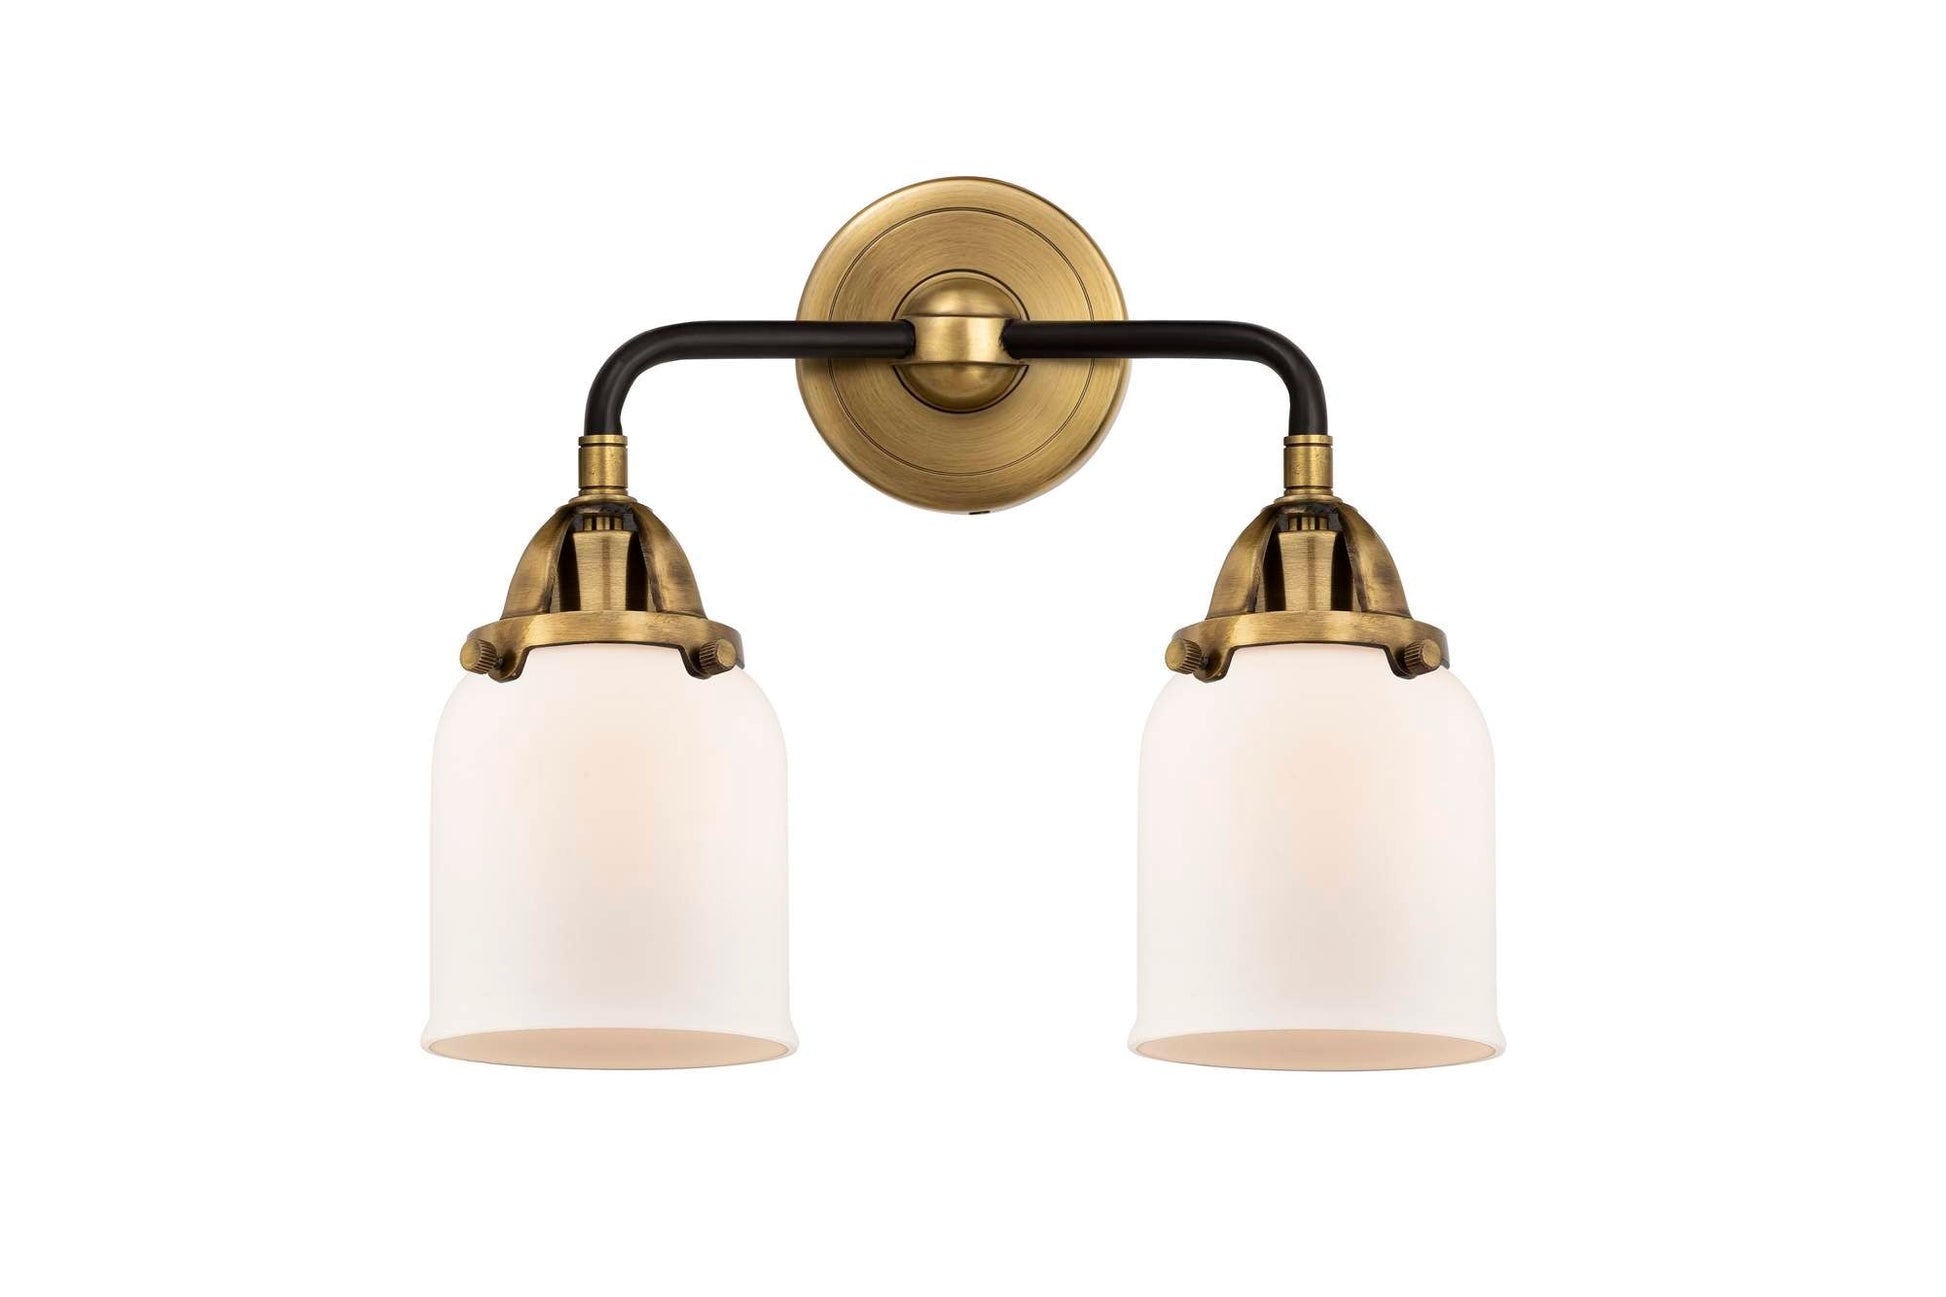 288-2W-BAB-G51 2-Light 13" Black Antique Brass Bath Vanity Light - Matte White Cased Small Bell Glass - LED Bulb - Dimmensions: 13 x 6.75 x 12.125 - Glass Up or Down: Yes